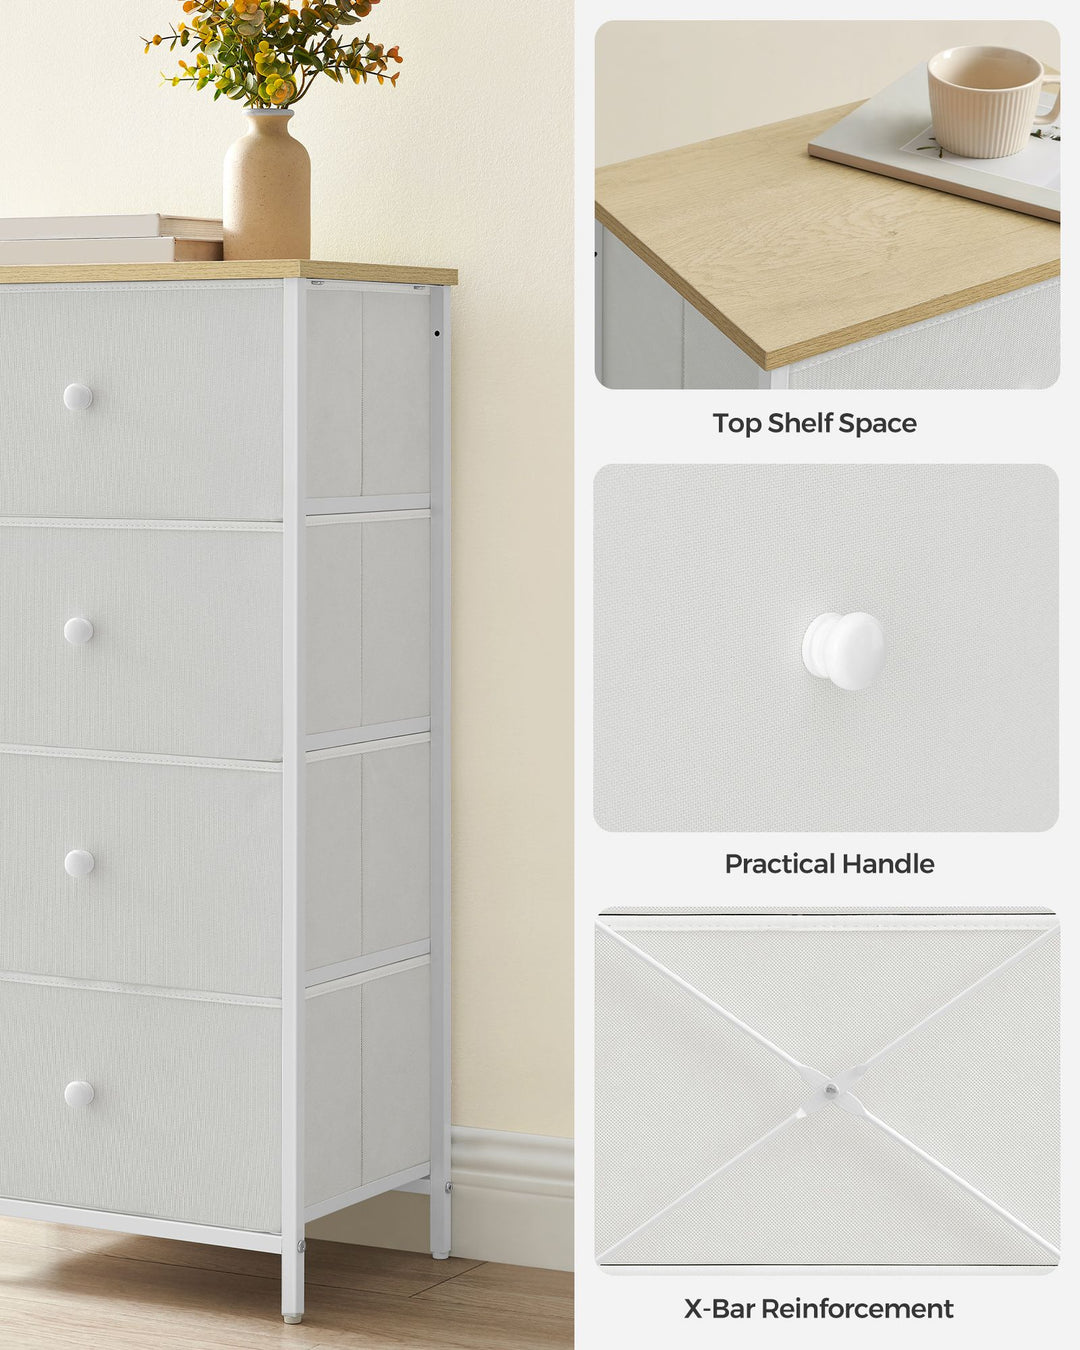 4 Fabric Drawers with Metal Frame White and Oak